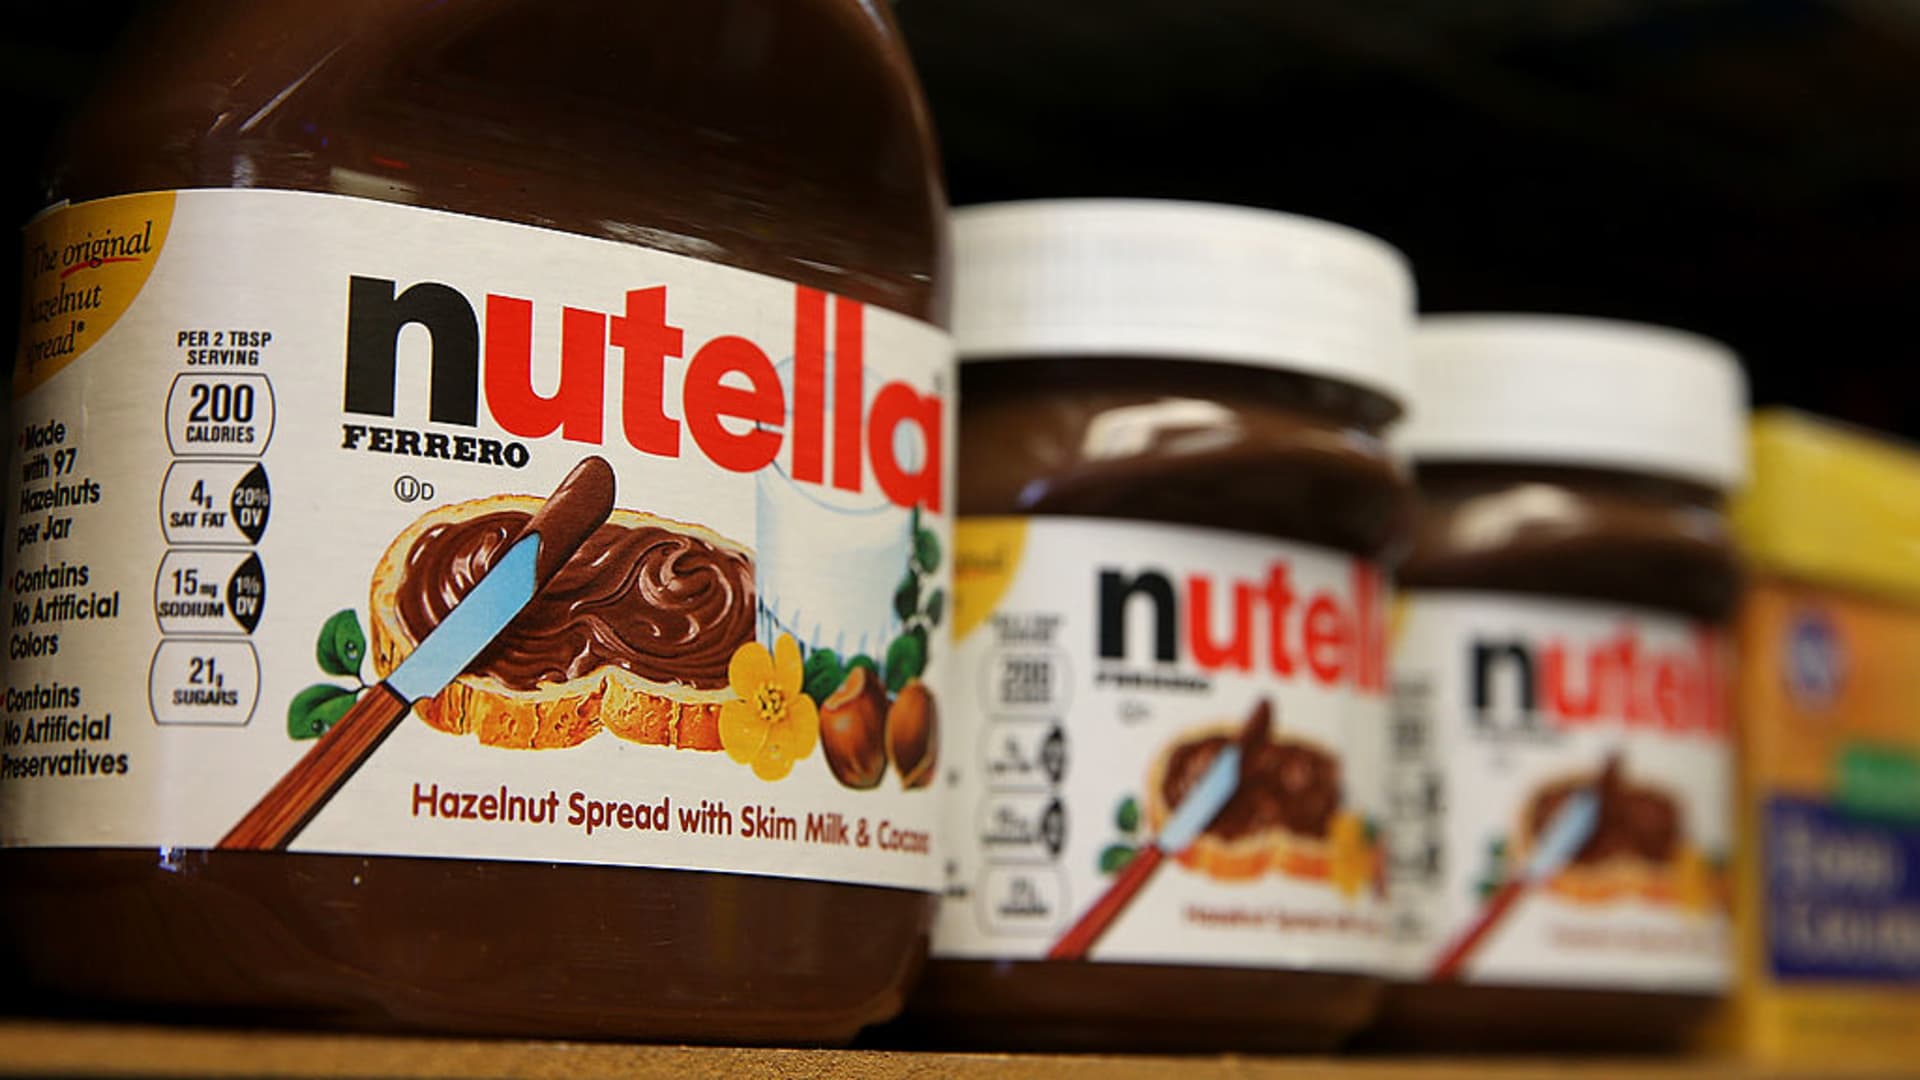 27 Mispronounced Brand Names And How To Actually Pronounce Them